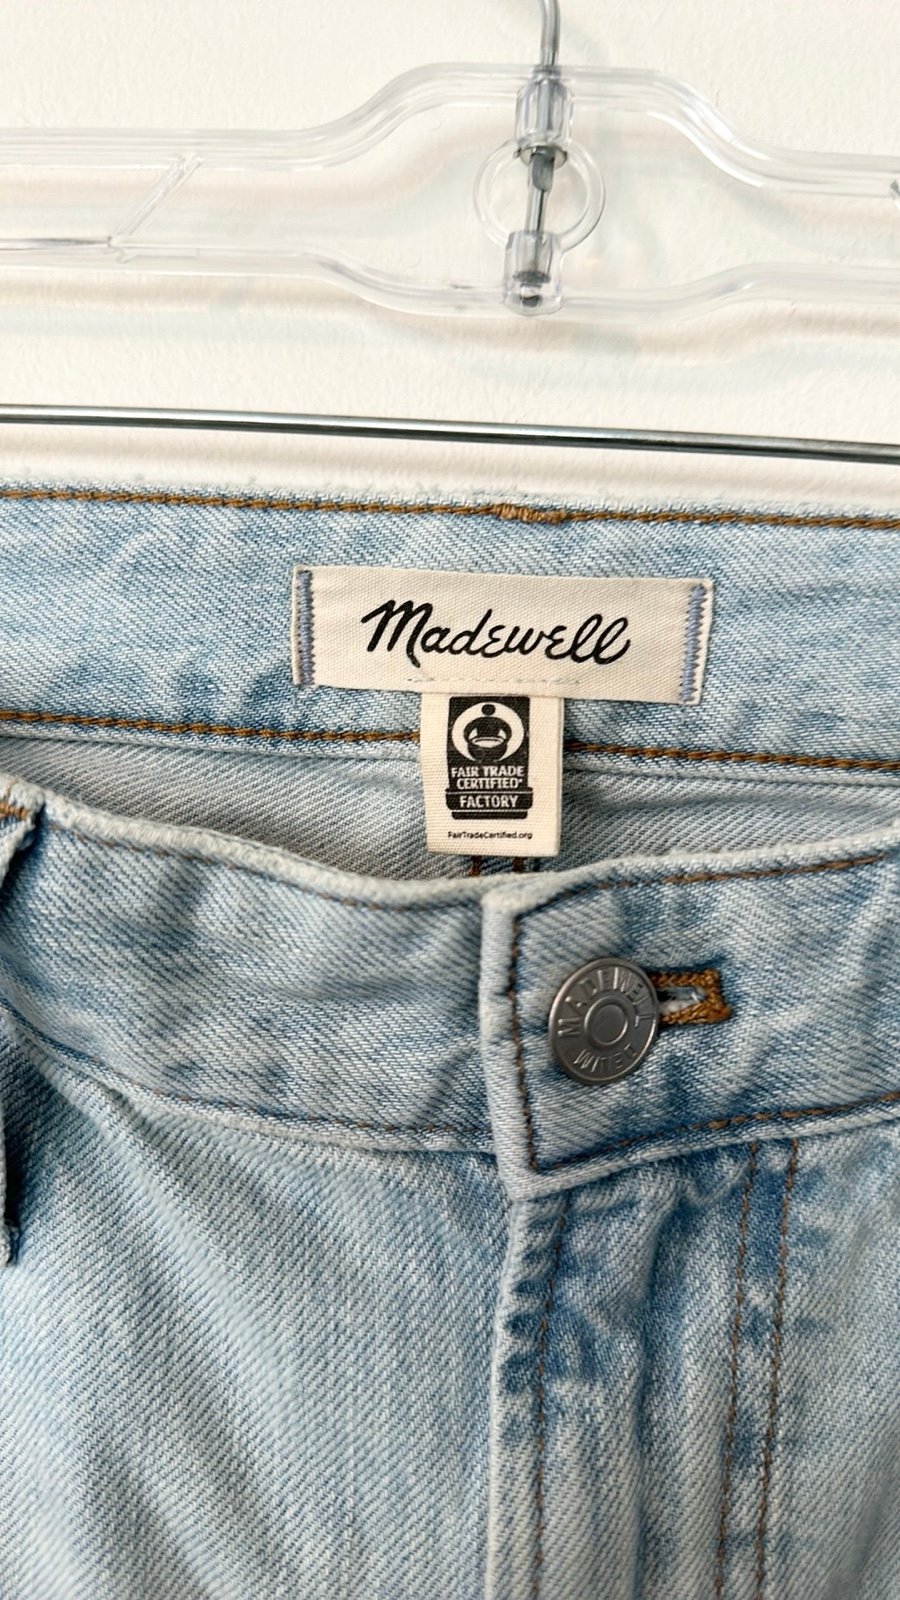 high discount Madewell The Curvy Perfect Vintage Jean 30P iIXK8UVpd outlet online shop